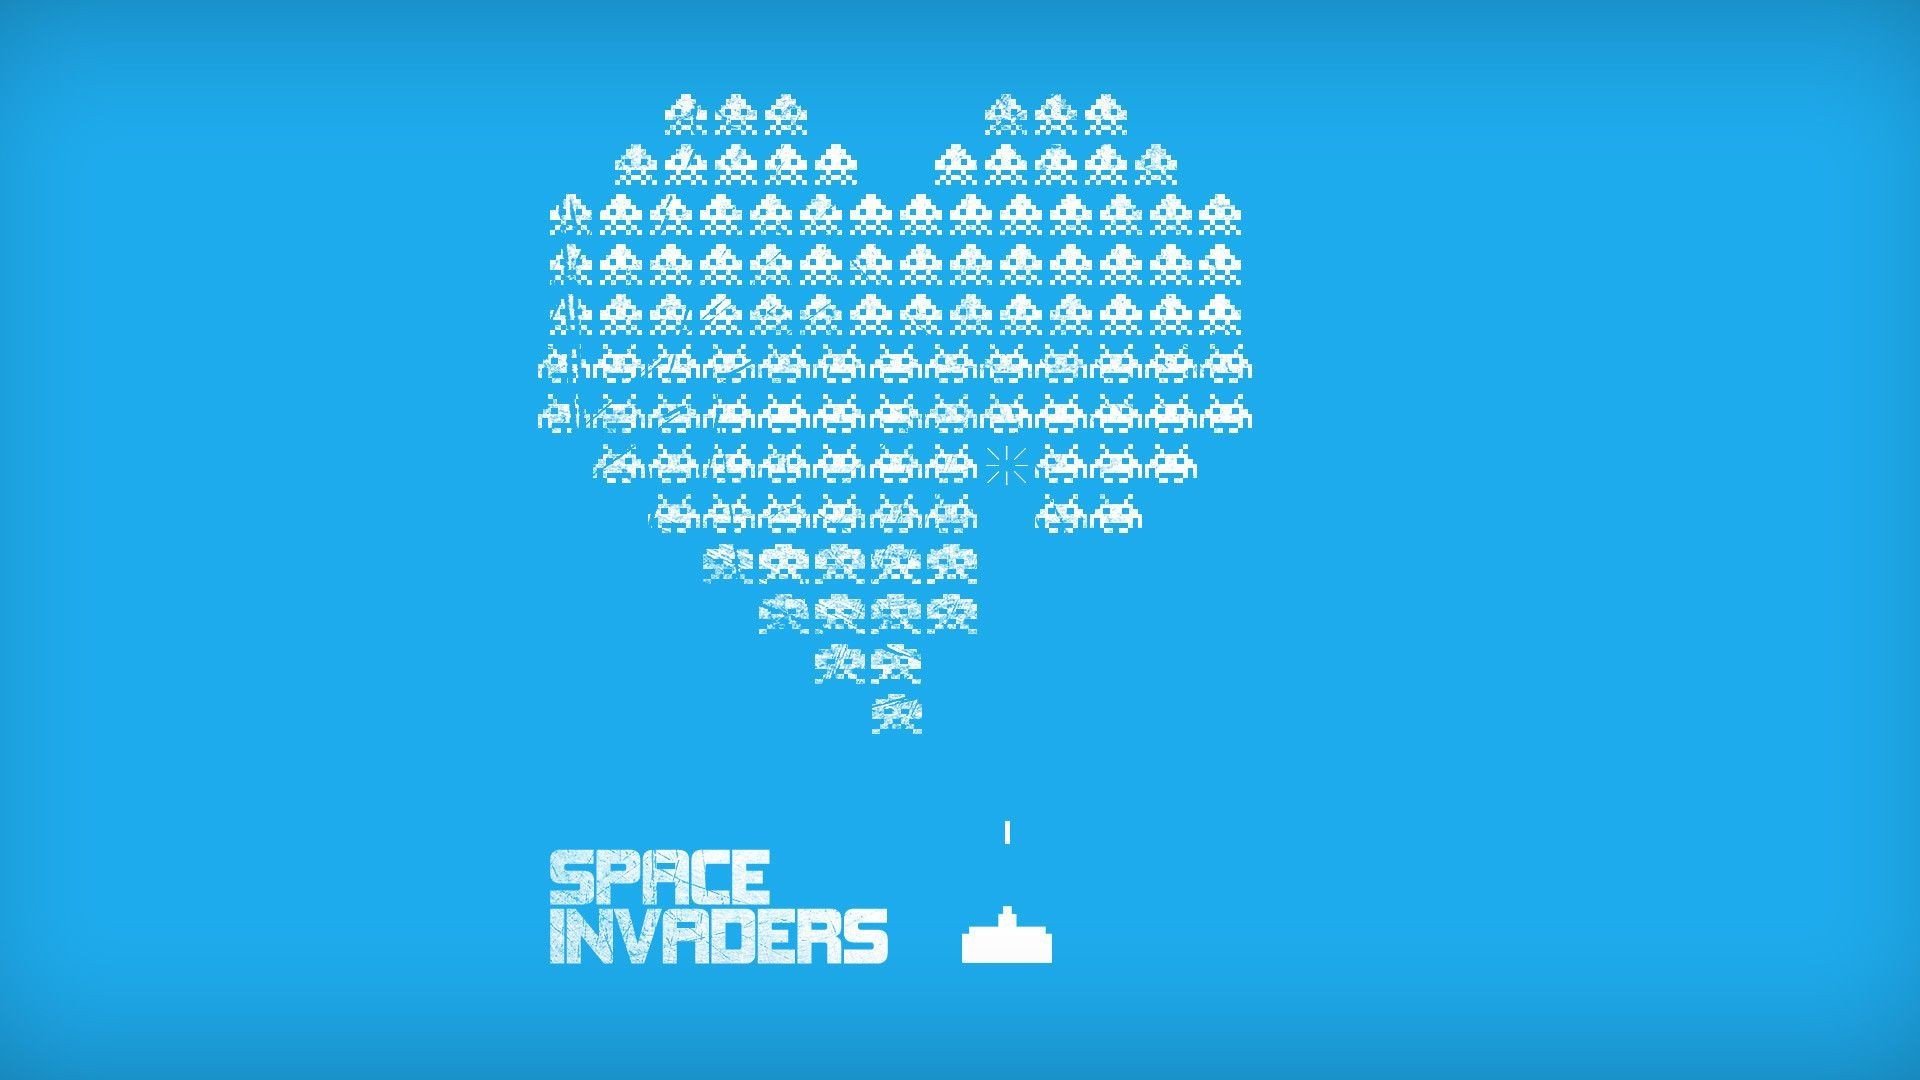 blue background, Retro games, Space Invaders, Video games, Minimalism Wallpaper